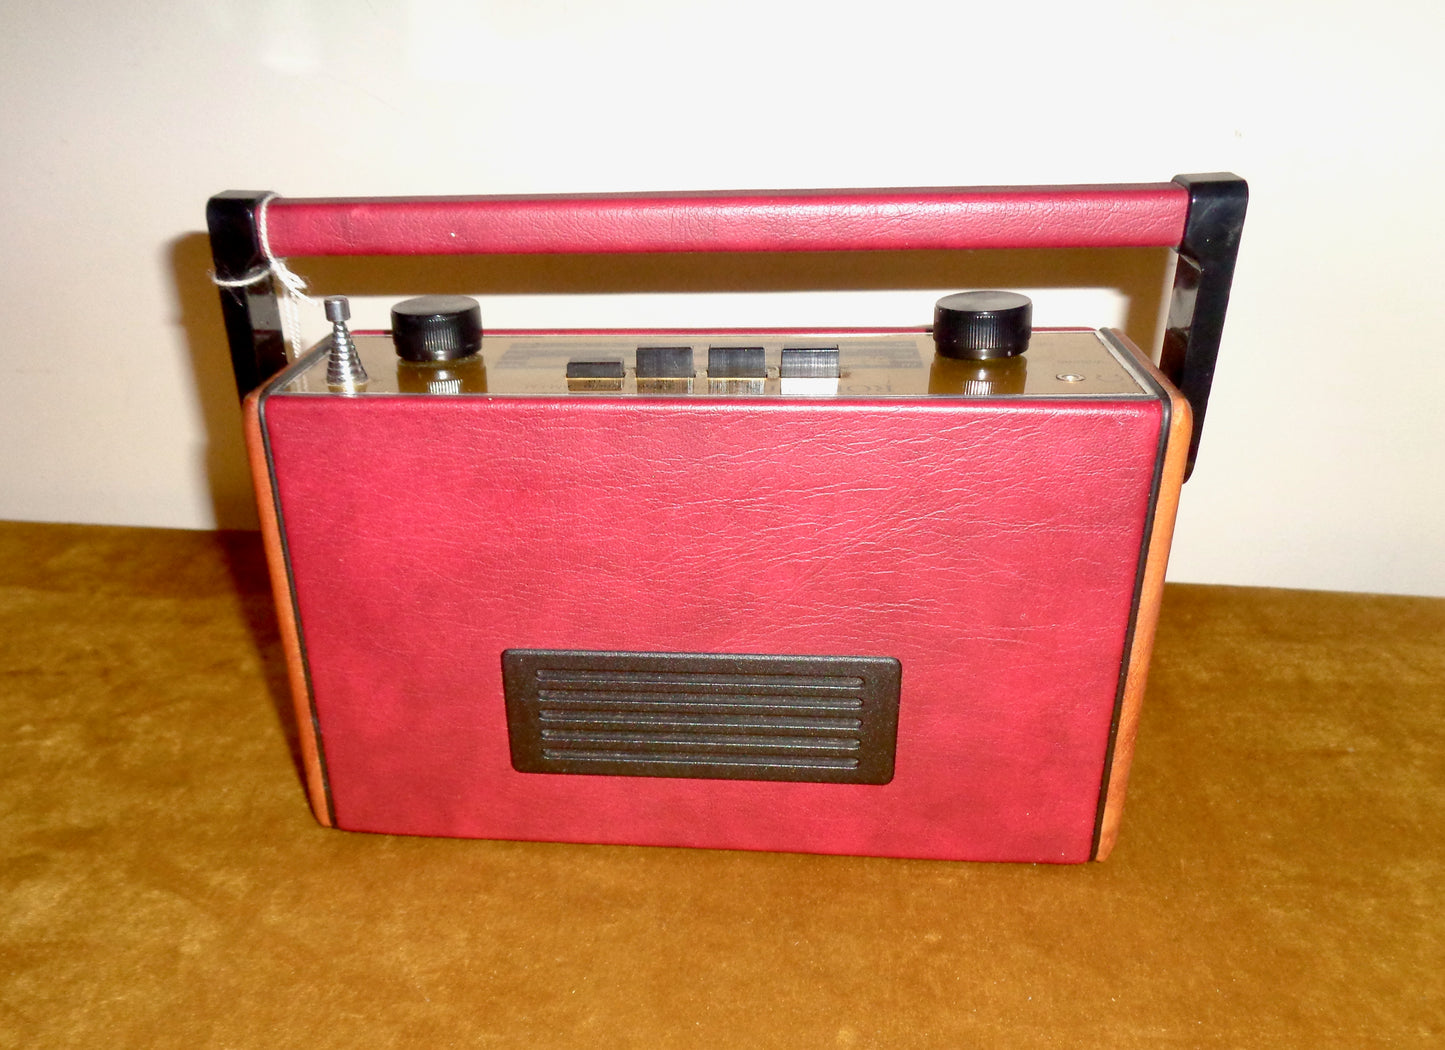 Vintage R757 Roberts Radio With Red Leatherette